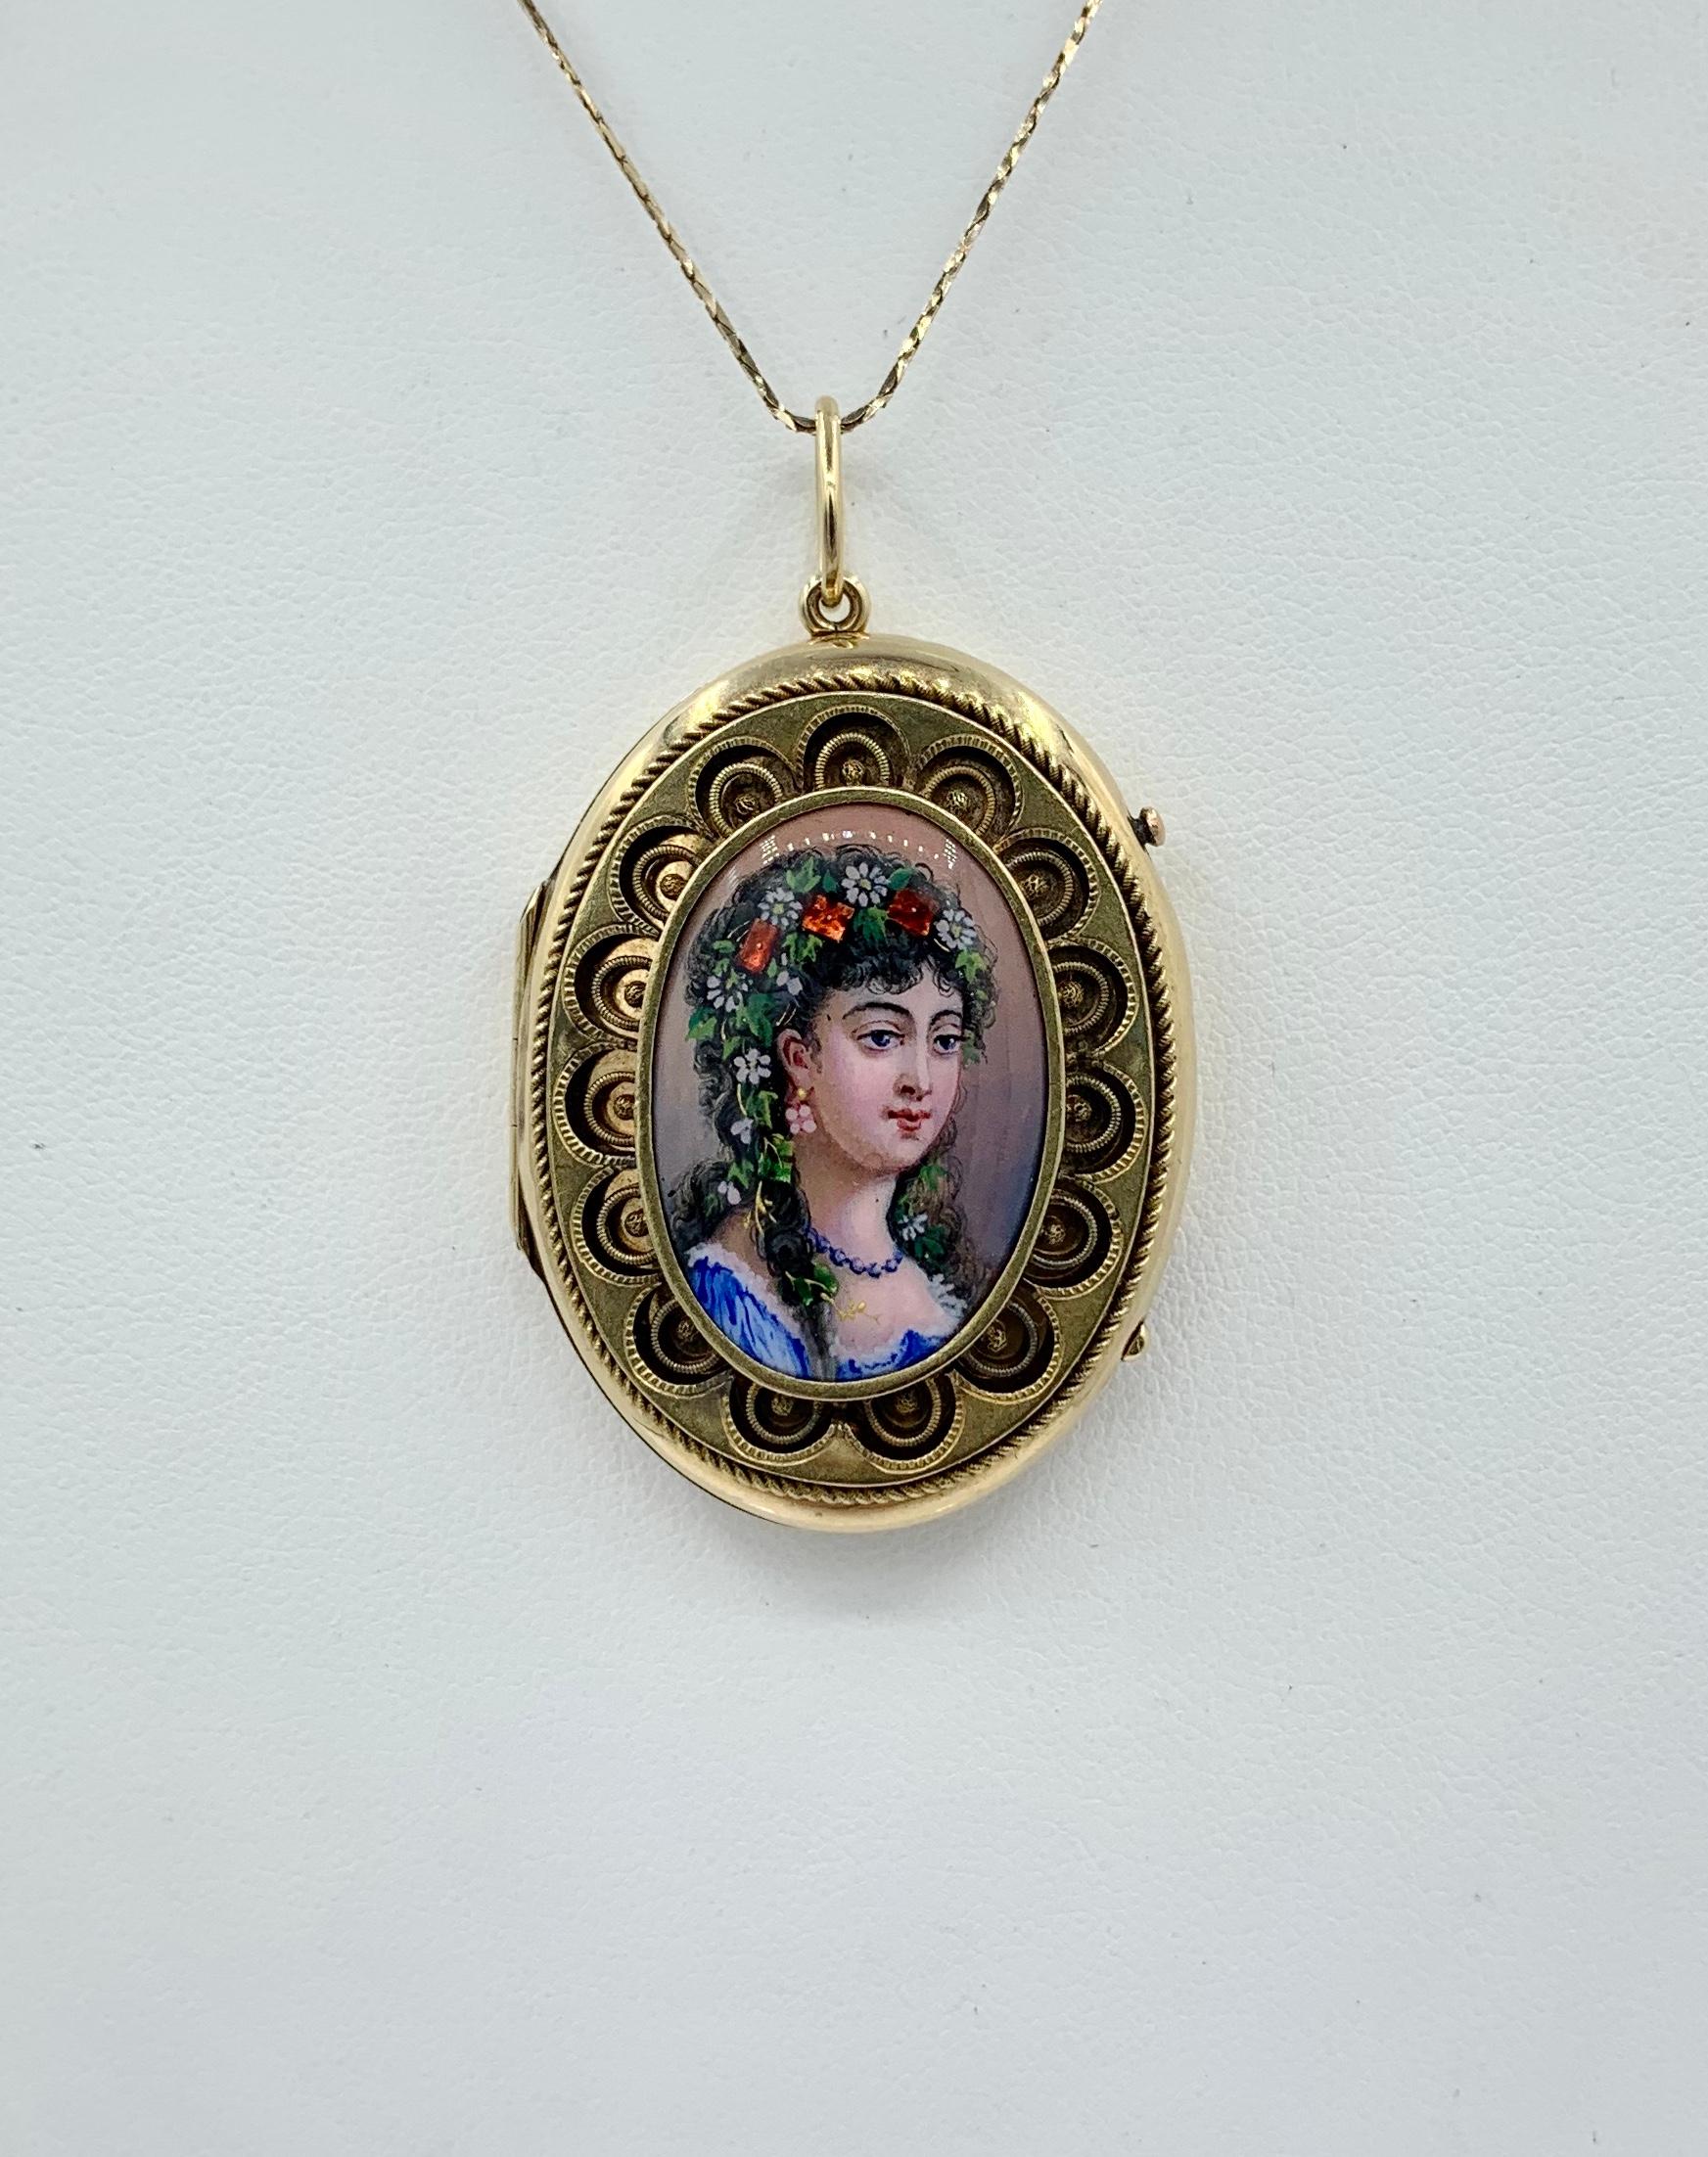 This is a Museum Quality Antique Victorian - Belle Epoque Locket Pendant with exquisite Swiss Enamel Portrait decoration of a woman with a garland of flowers in her hair with an exquisite open work border design in 14 Karat Gold.  The locket dates